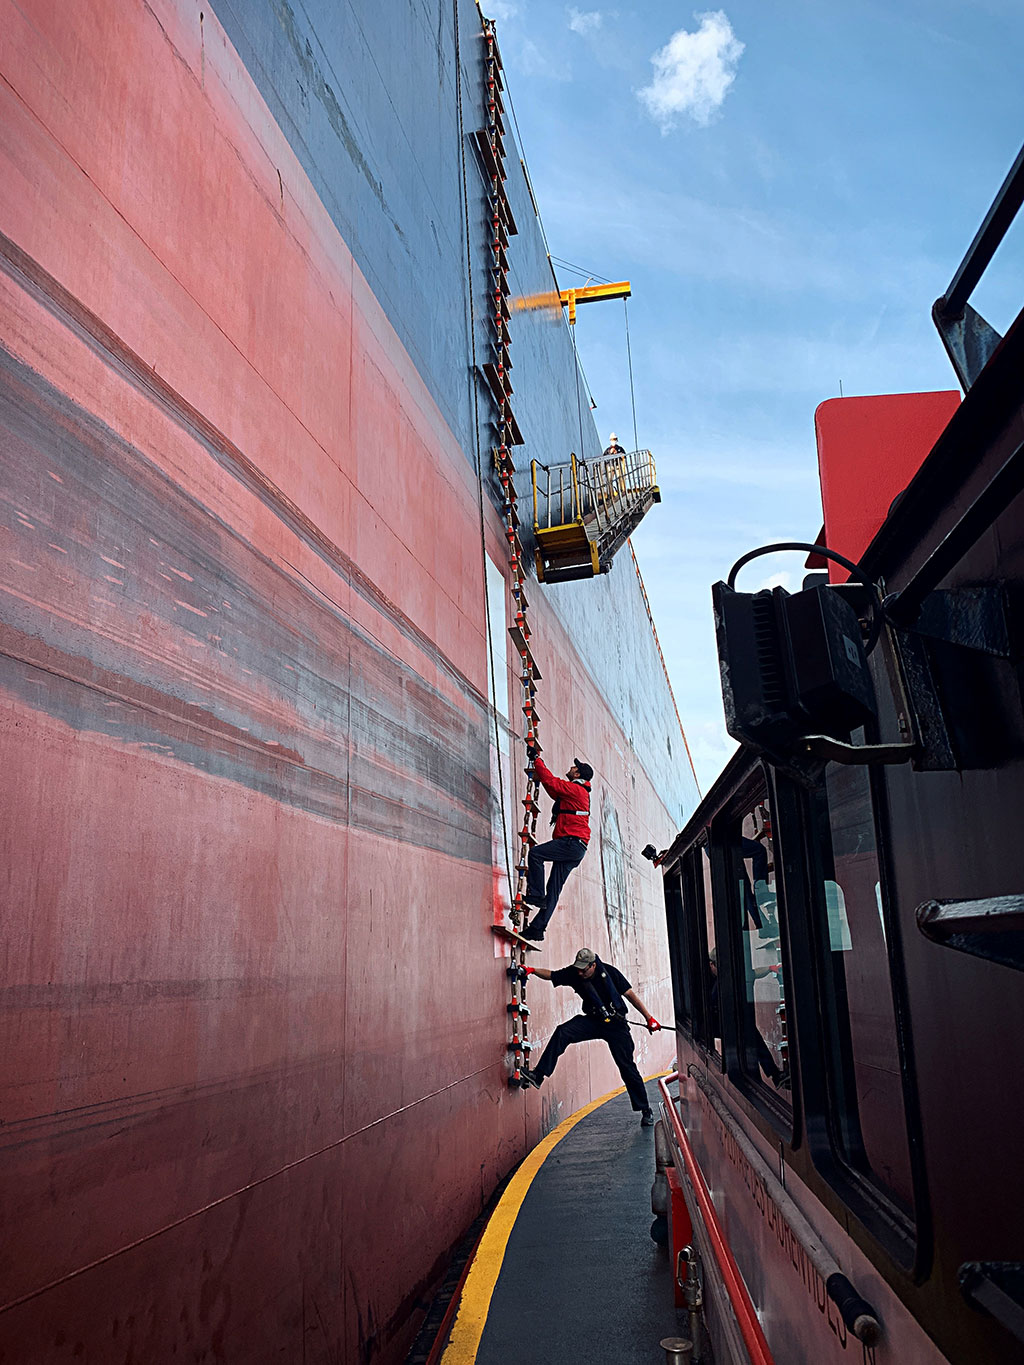 Photo of a pilot climbing up a flexible pilot ladder to an accommodation ladder resting against a ship, while a person on a pilot boat beside the ship steadies the pilot’s ladder, and a person on the ship stands by the accommodation ladder